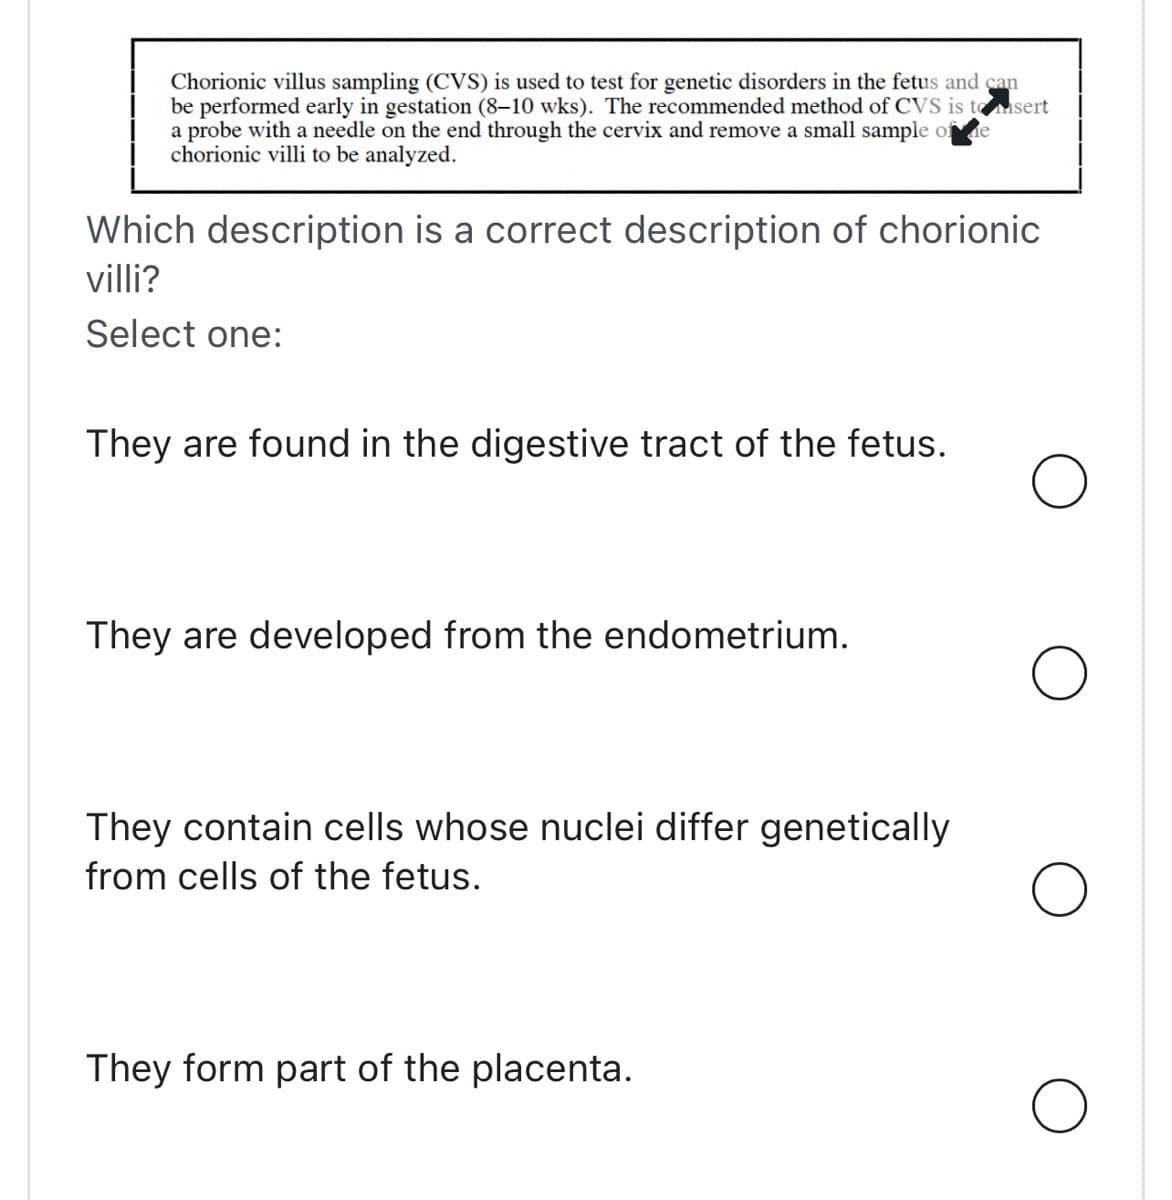 Chorionic villus sampling (CVS) is used to test for genetic disorders in the fetus and can
be performed early in gestation (8-10 wks). The recommended method of CVS is to sert
a probe with a needle on the end through the cervix and remove a small sample of e
chorionic villi to be analyzed.
Which description is a correct description of chorionic
villi?
Select one:
They are found in the digestive tract of the fetus.
They are developed from the endometrium.
They contain cells whose nuclei differ genetically
from cells of the fetus.
They form part of the placenta.